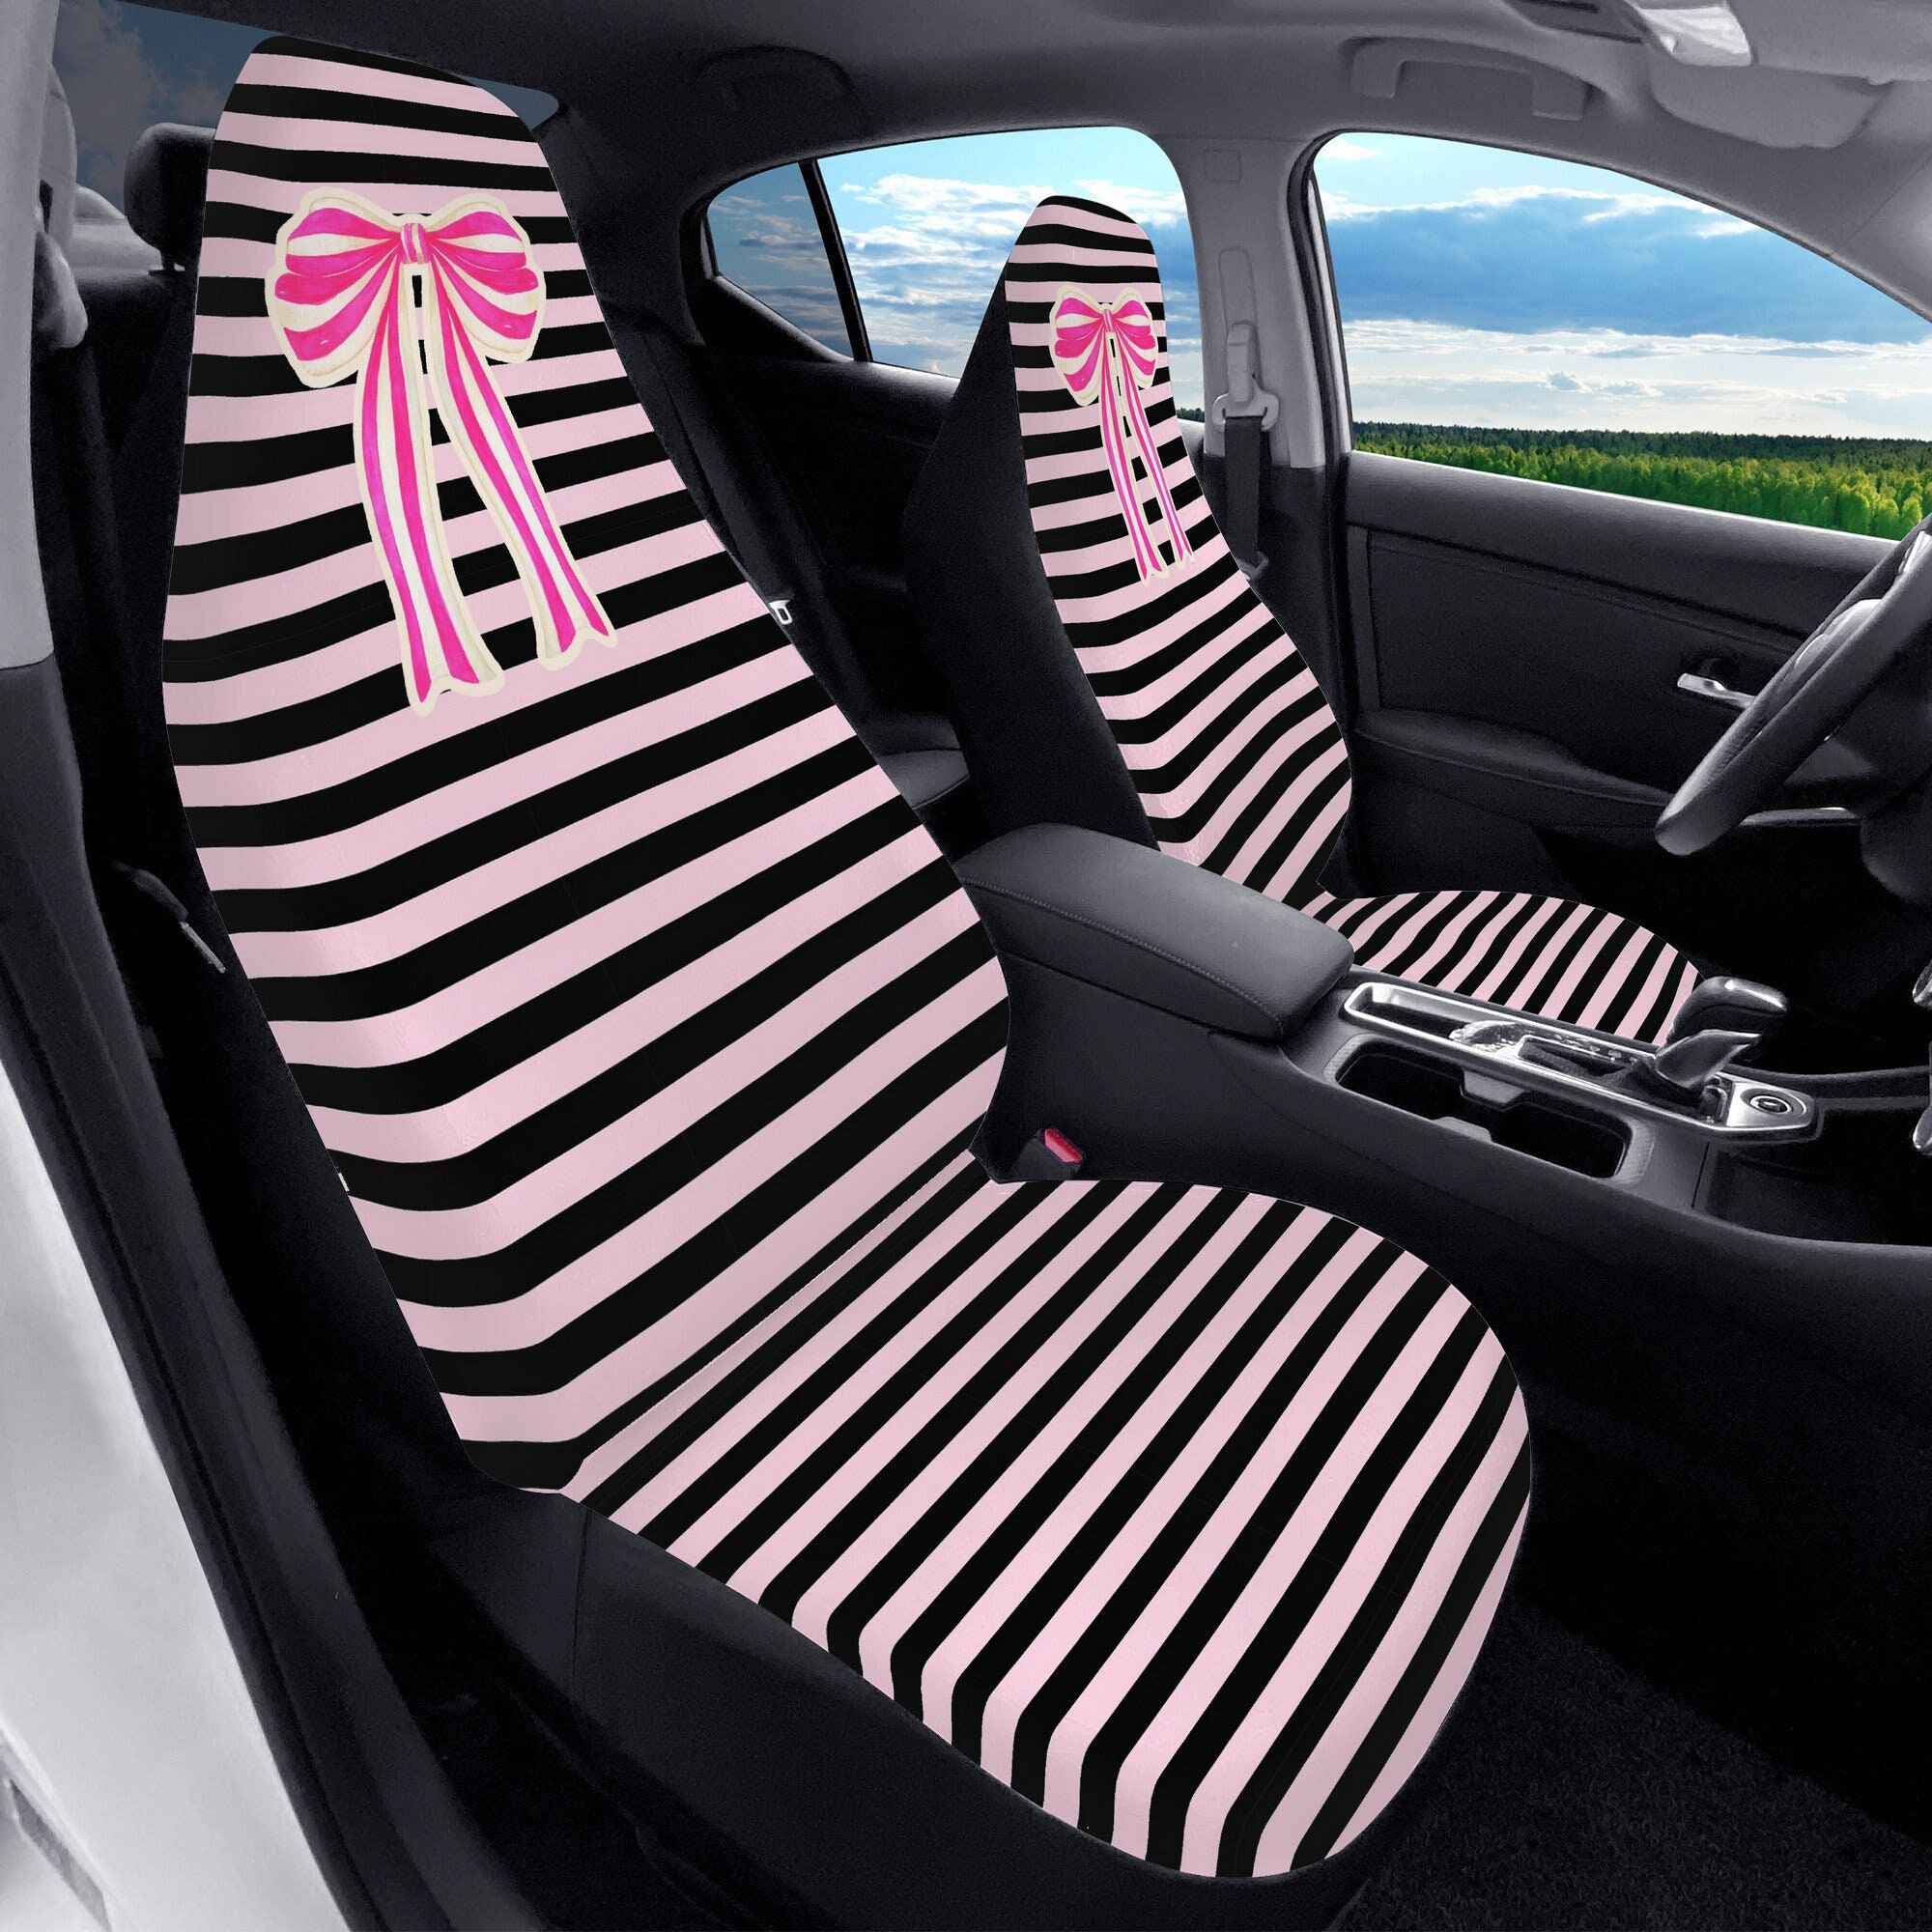 Take It Easy Car Seat Covers, Car Seat Cover, Colorful Car Decor, Cute Car  Accessories, Car Gifts, Cool Car Accessories, Car Gifts for Women 